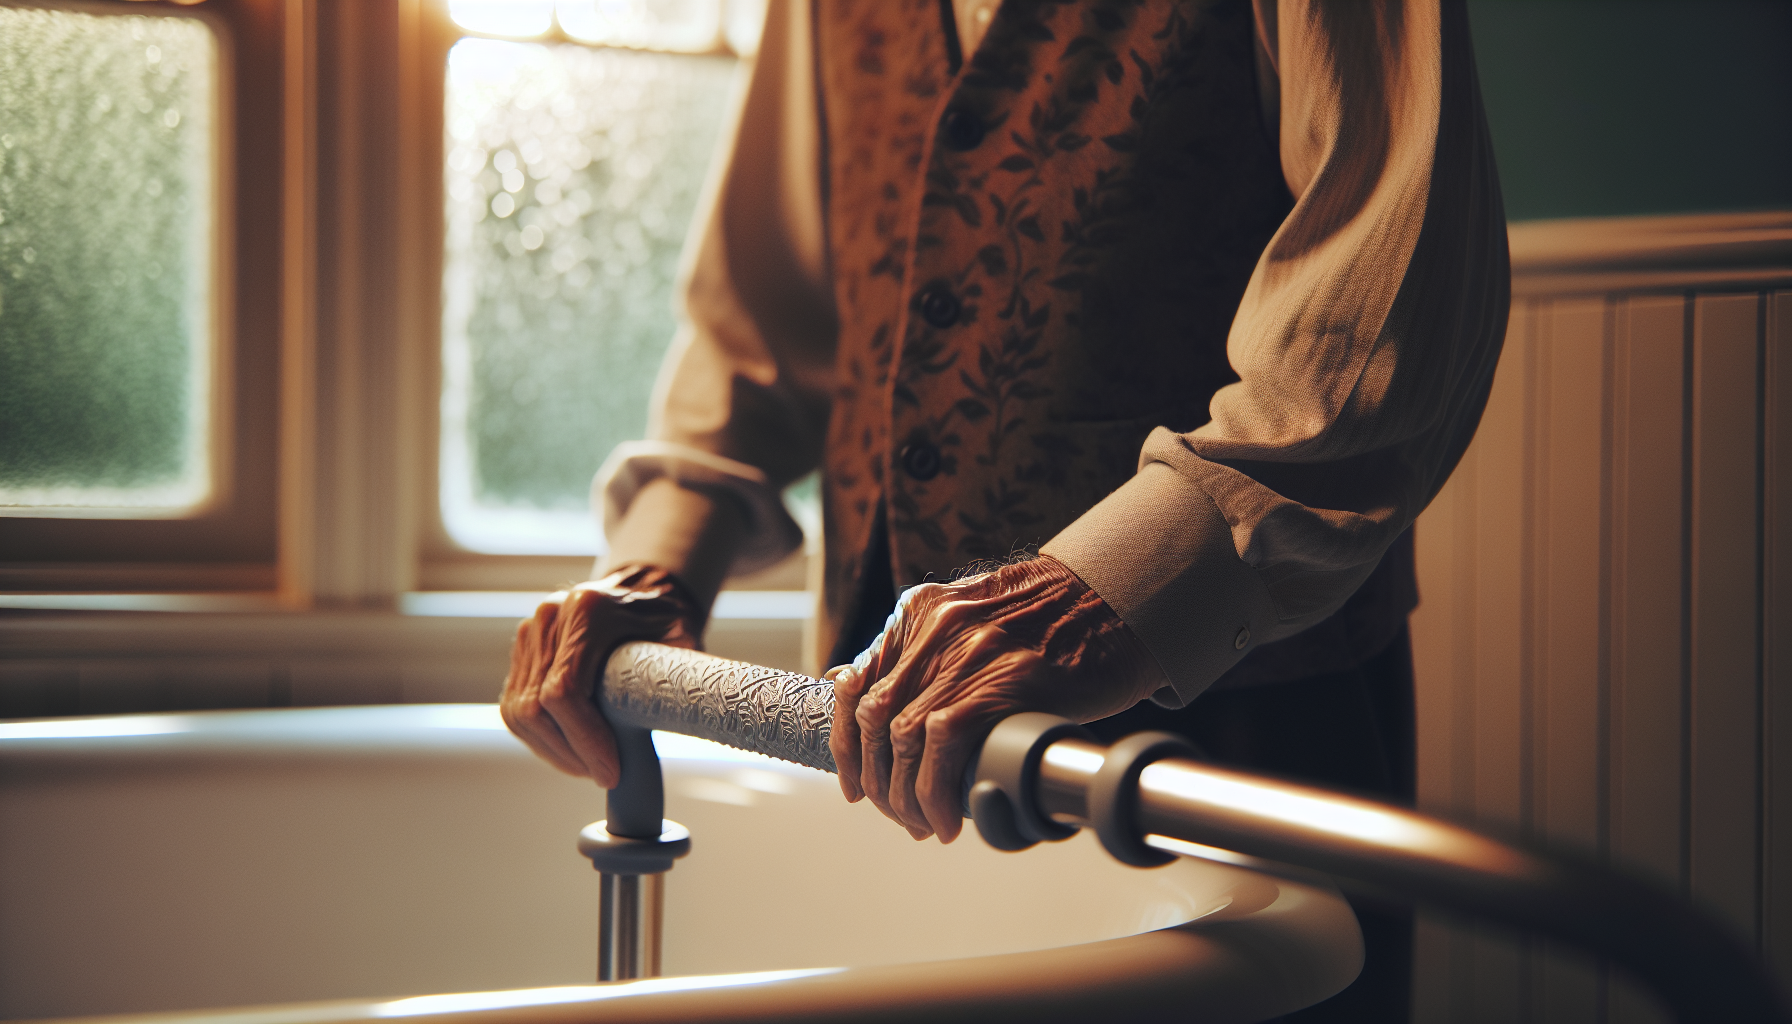 Elderly person holding onto a bathroom grab bar for support